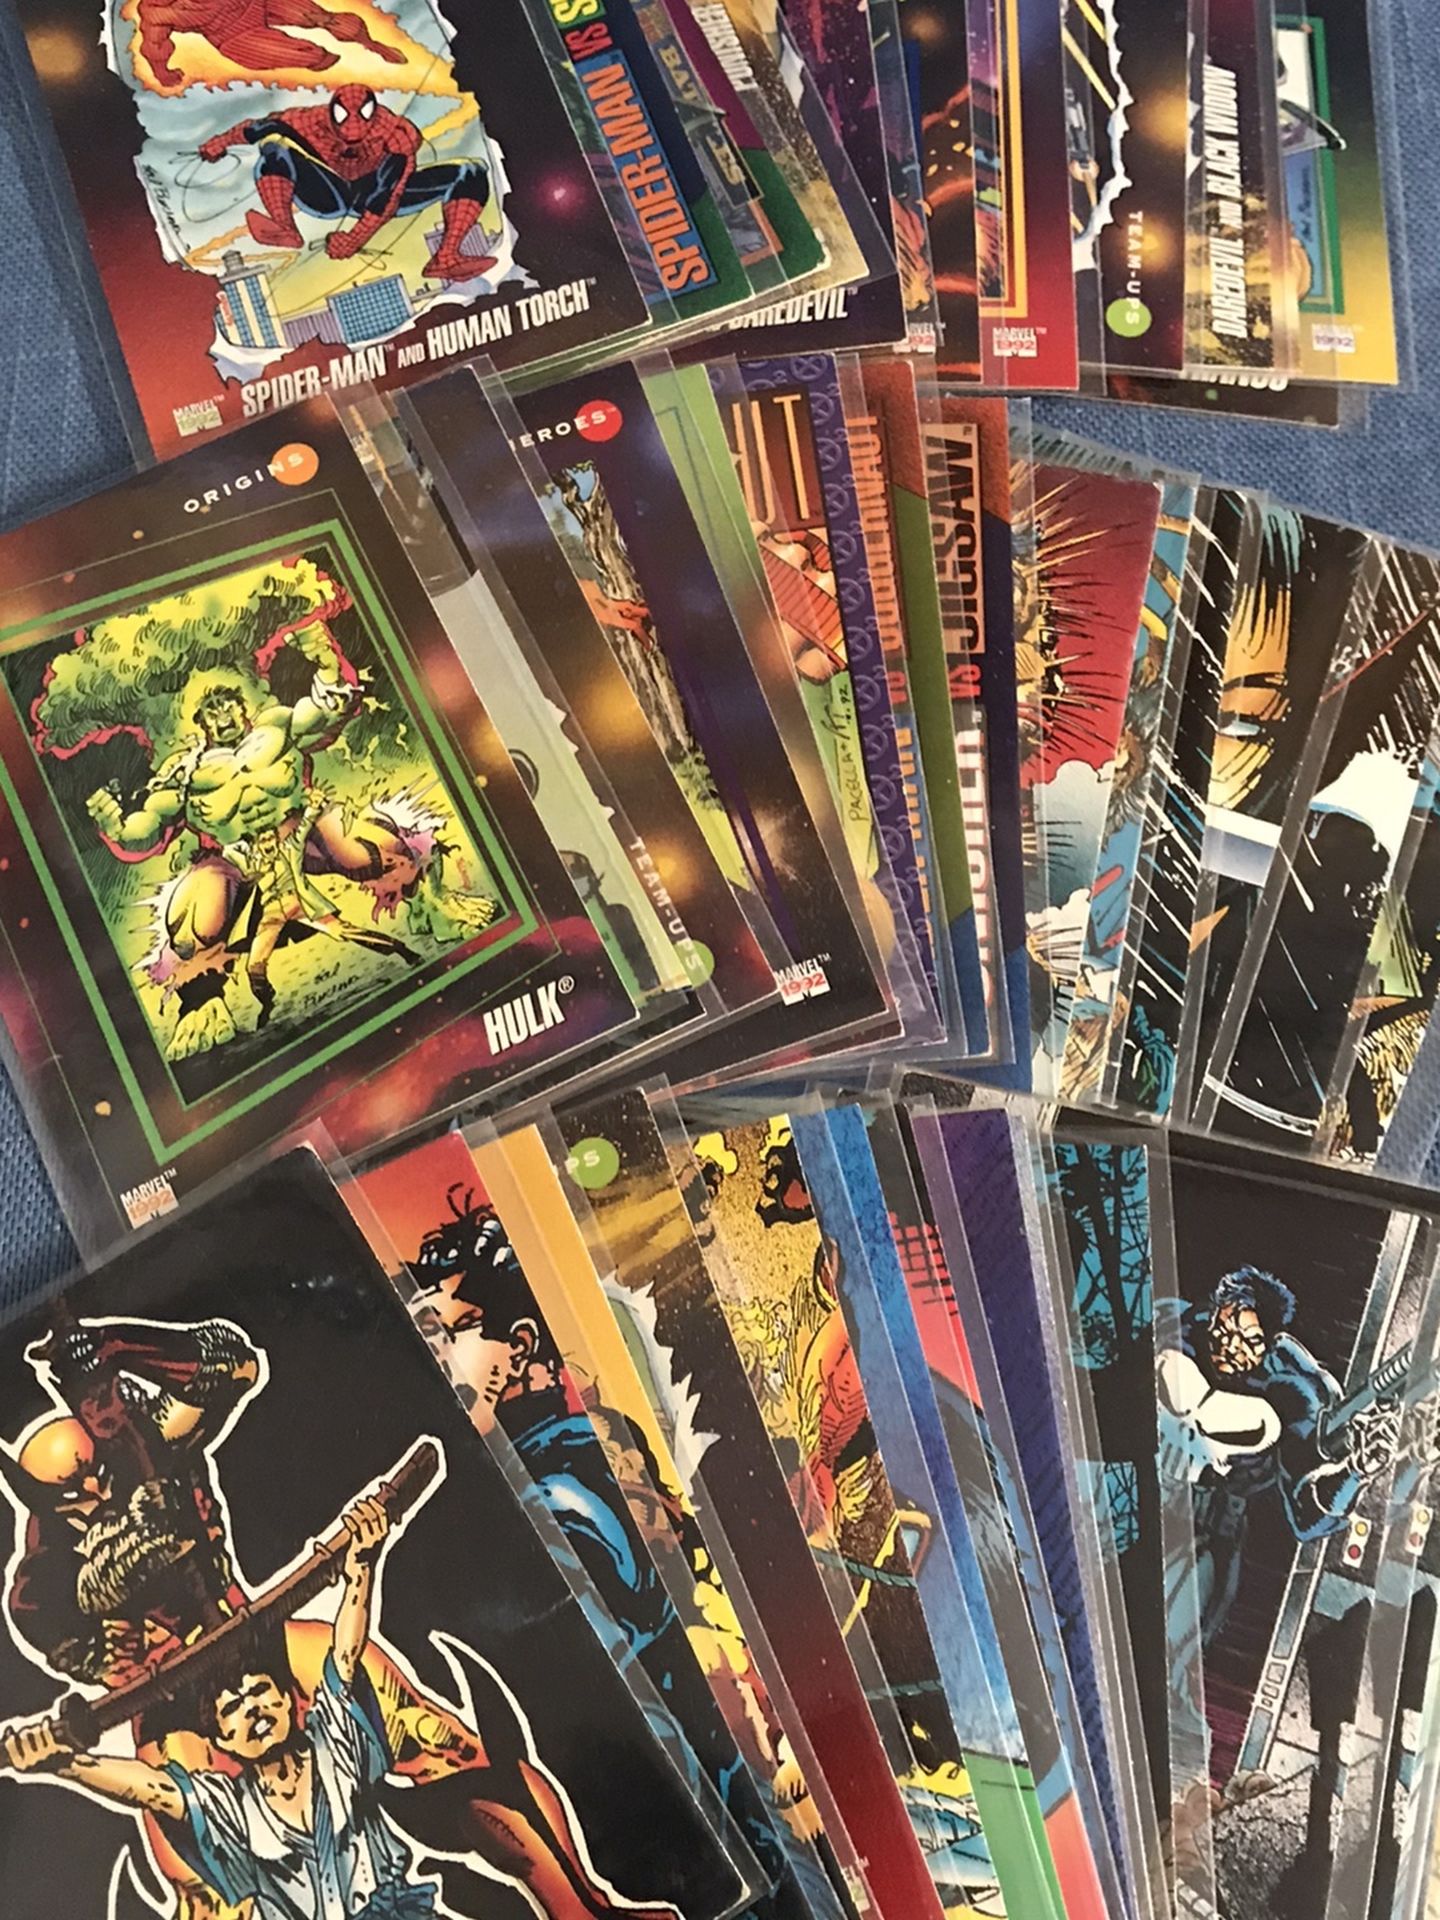 Marvel Trading Cards (1992) - Great Collectibles